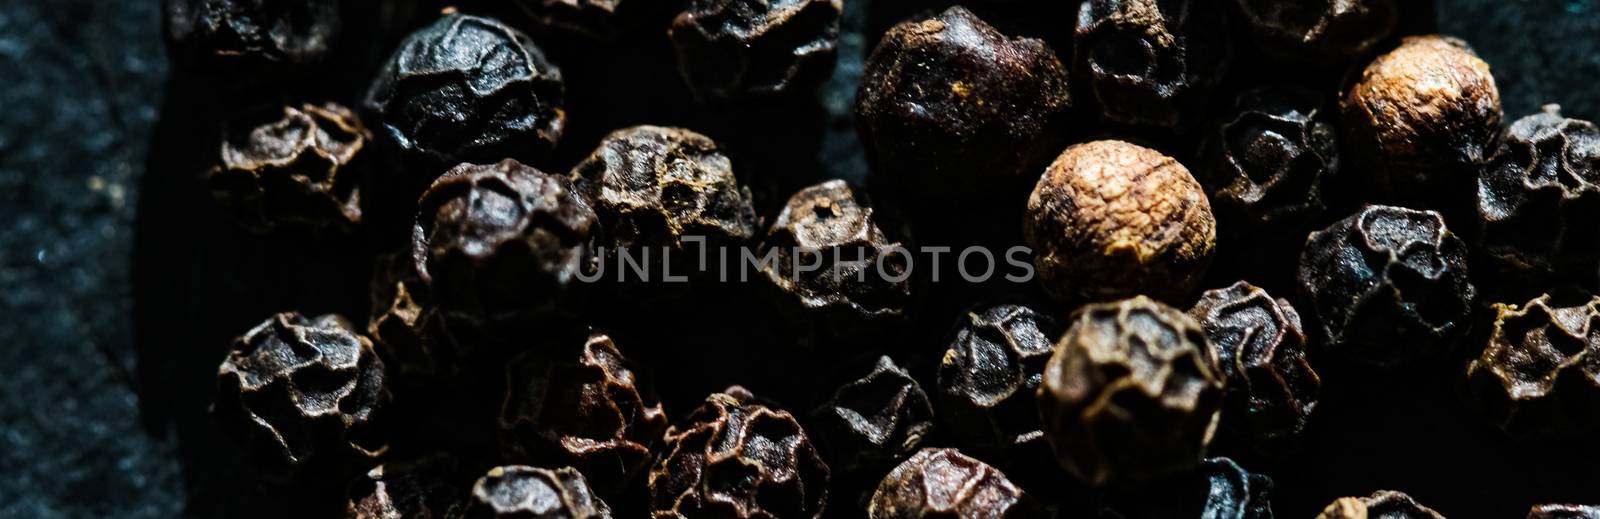 Black pepper closeup on luxury stone background as flat lay, dry food spices and recipe ingredient by Anneleven